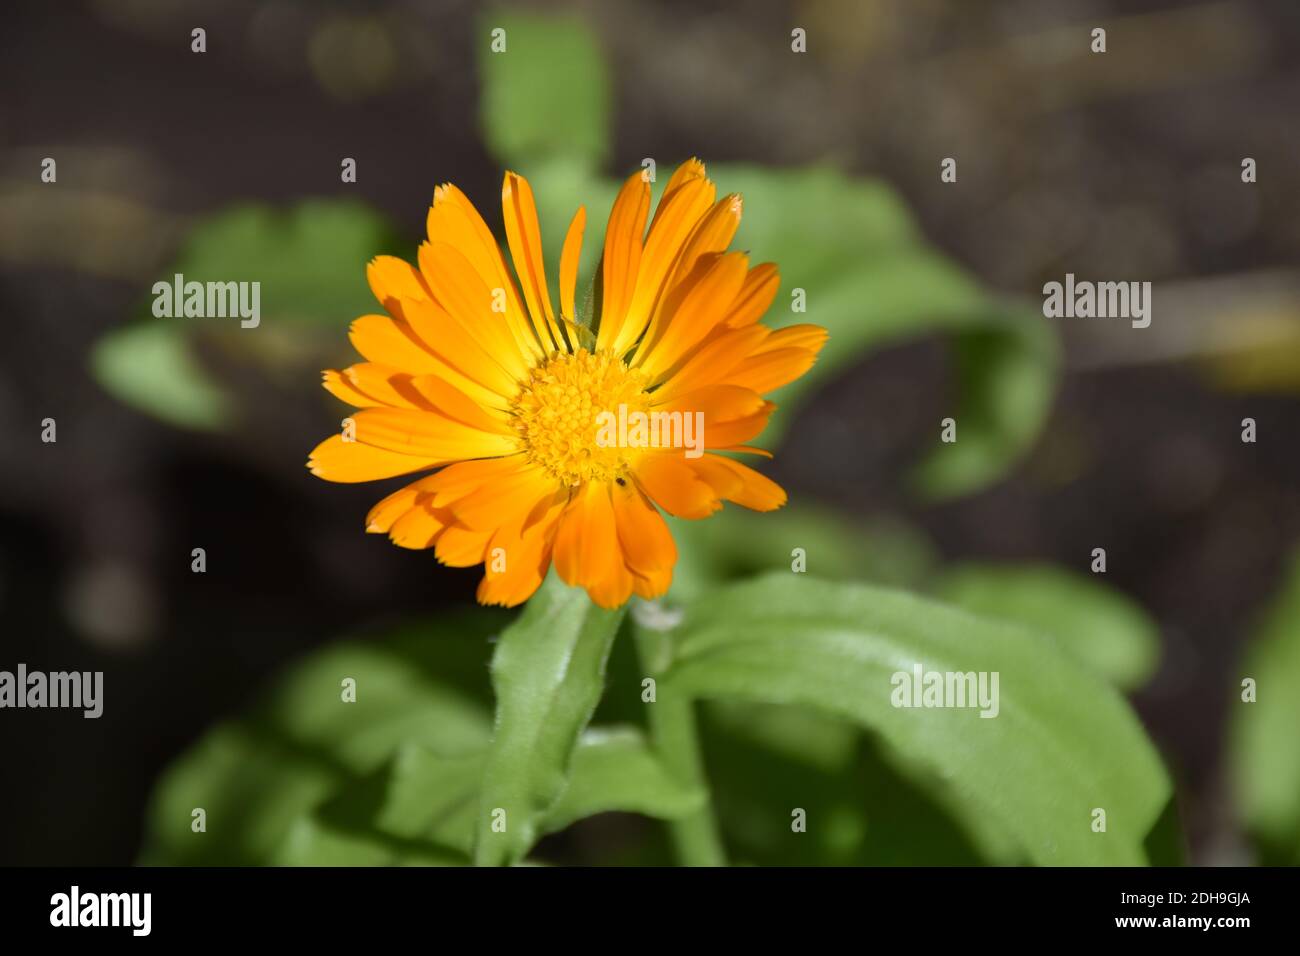 Calendula officinalis flower seen from the front with irregular petals. Stock Photo